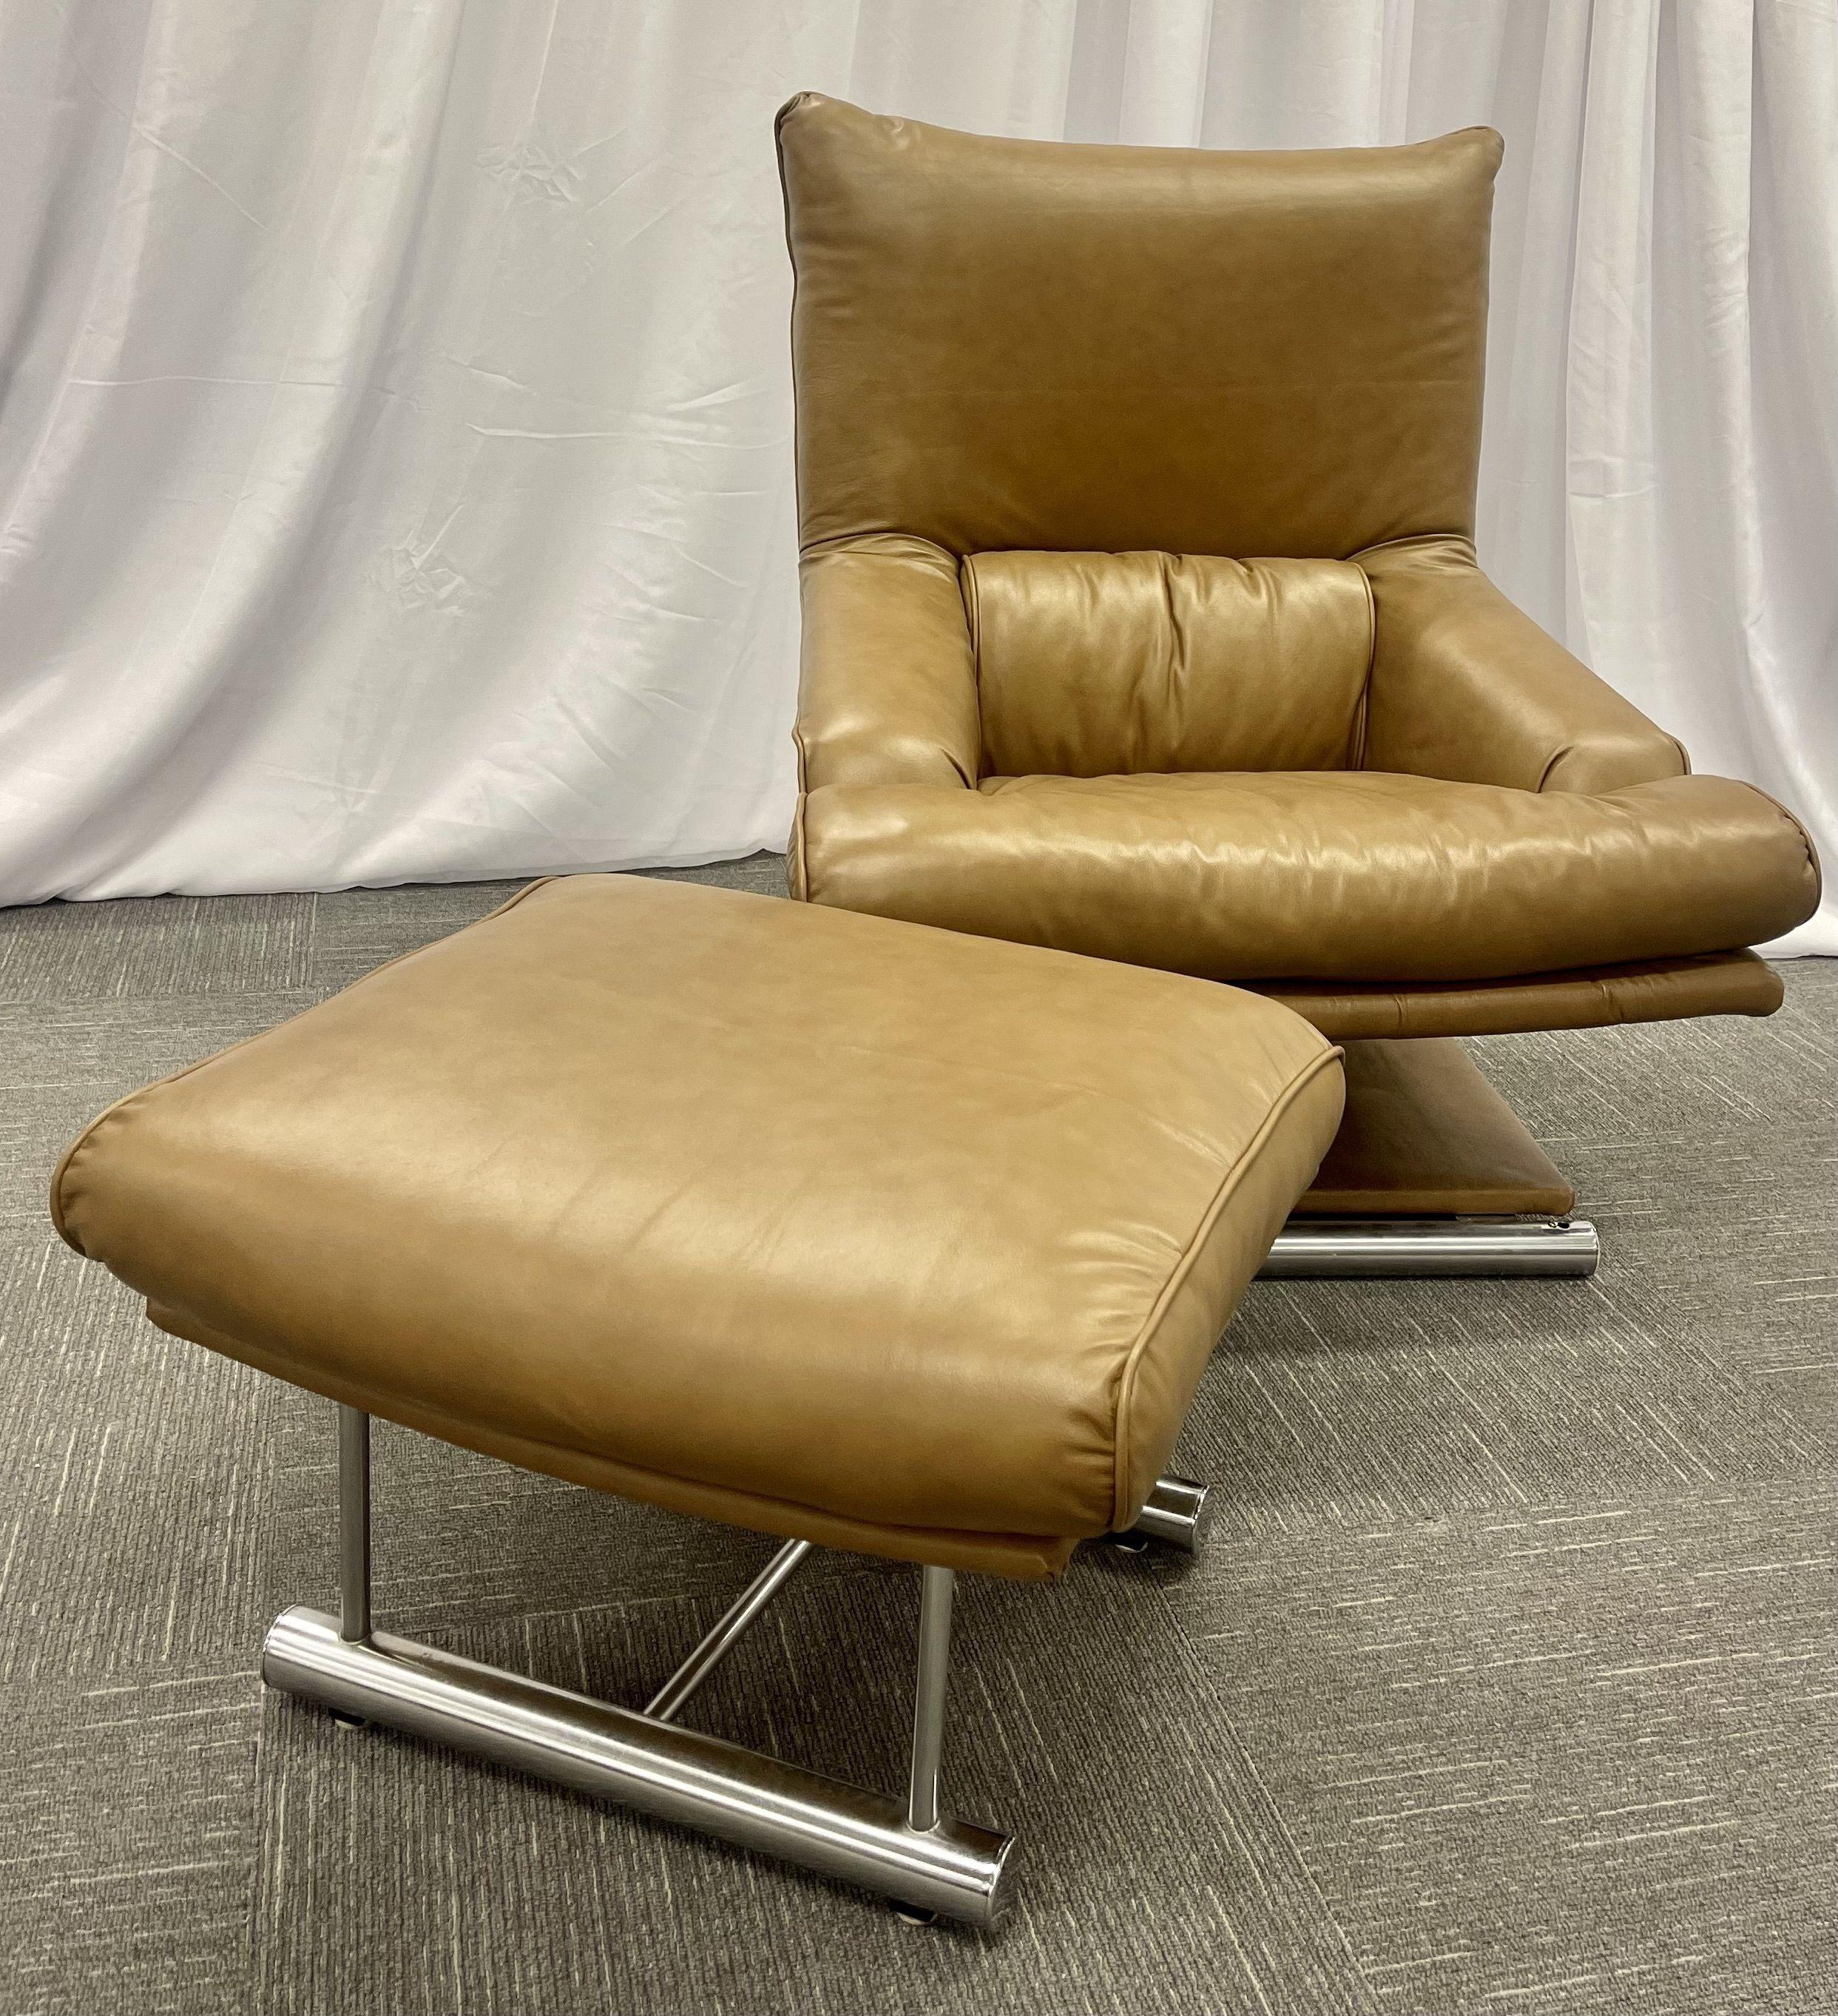 Vintage Leather Swivel, Lounge Chair with Ottoman, Percival Lafer Style, Steel In Good Condition For Sale In Stamford, CT